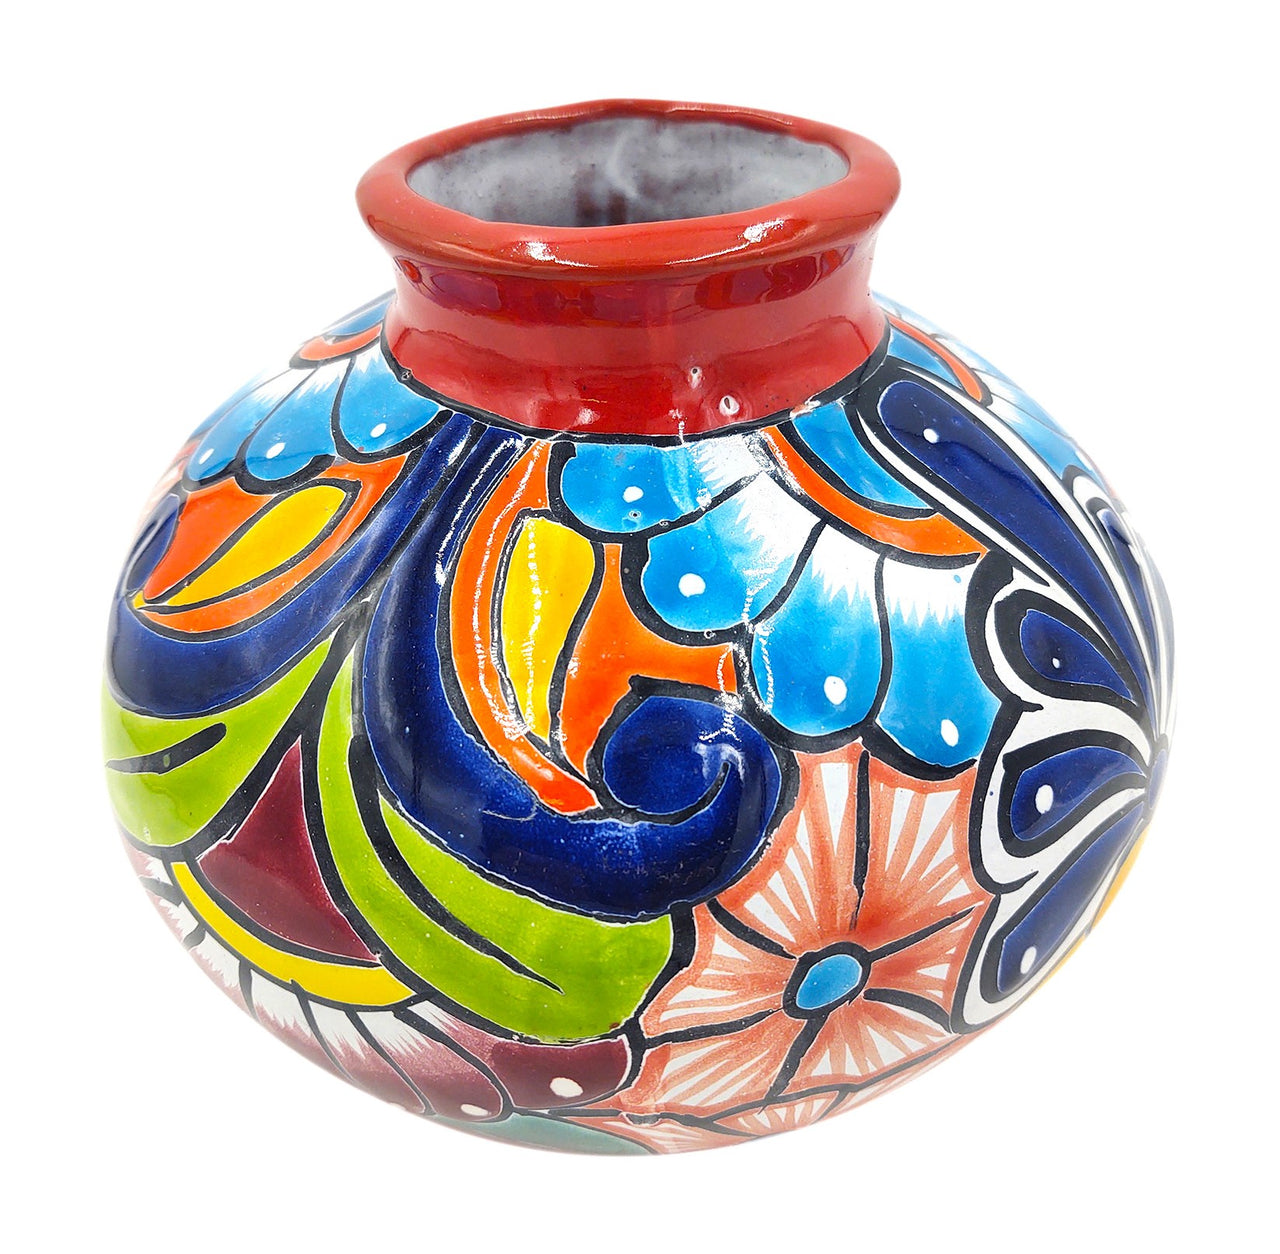 Mexican Talavera Hand Painted Flower Vase - Traditional Mexican Decorative Florero for Home Décor With Red Trim